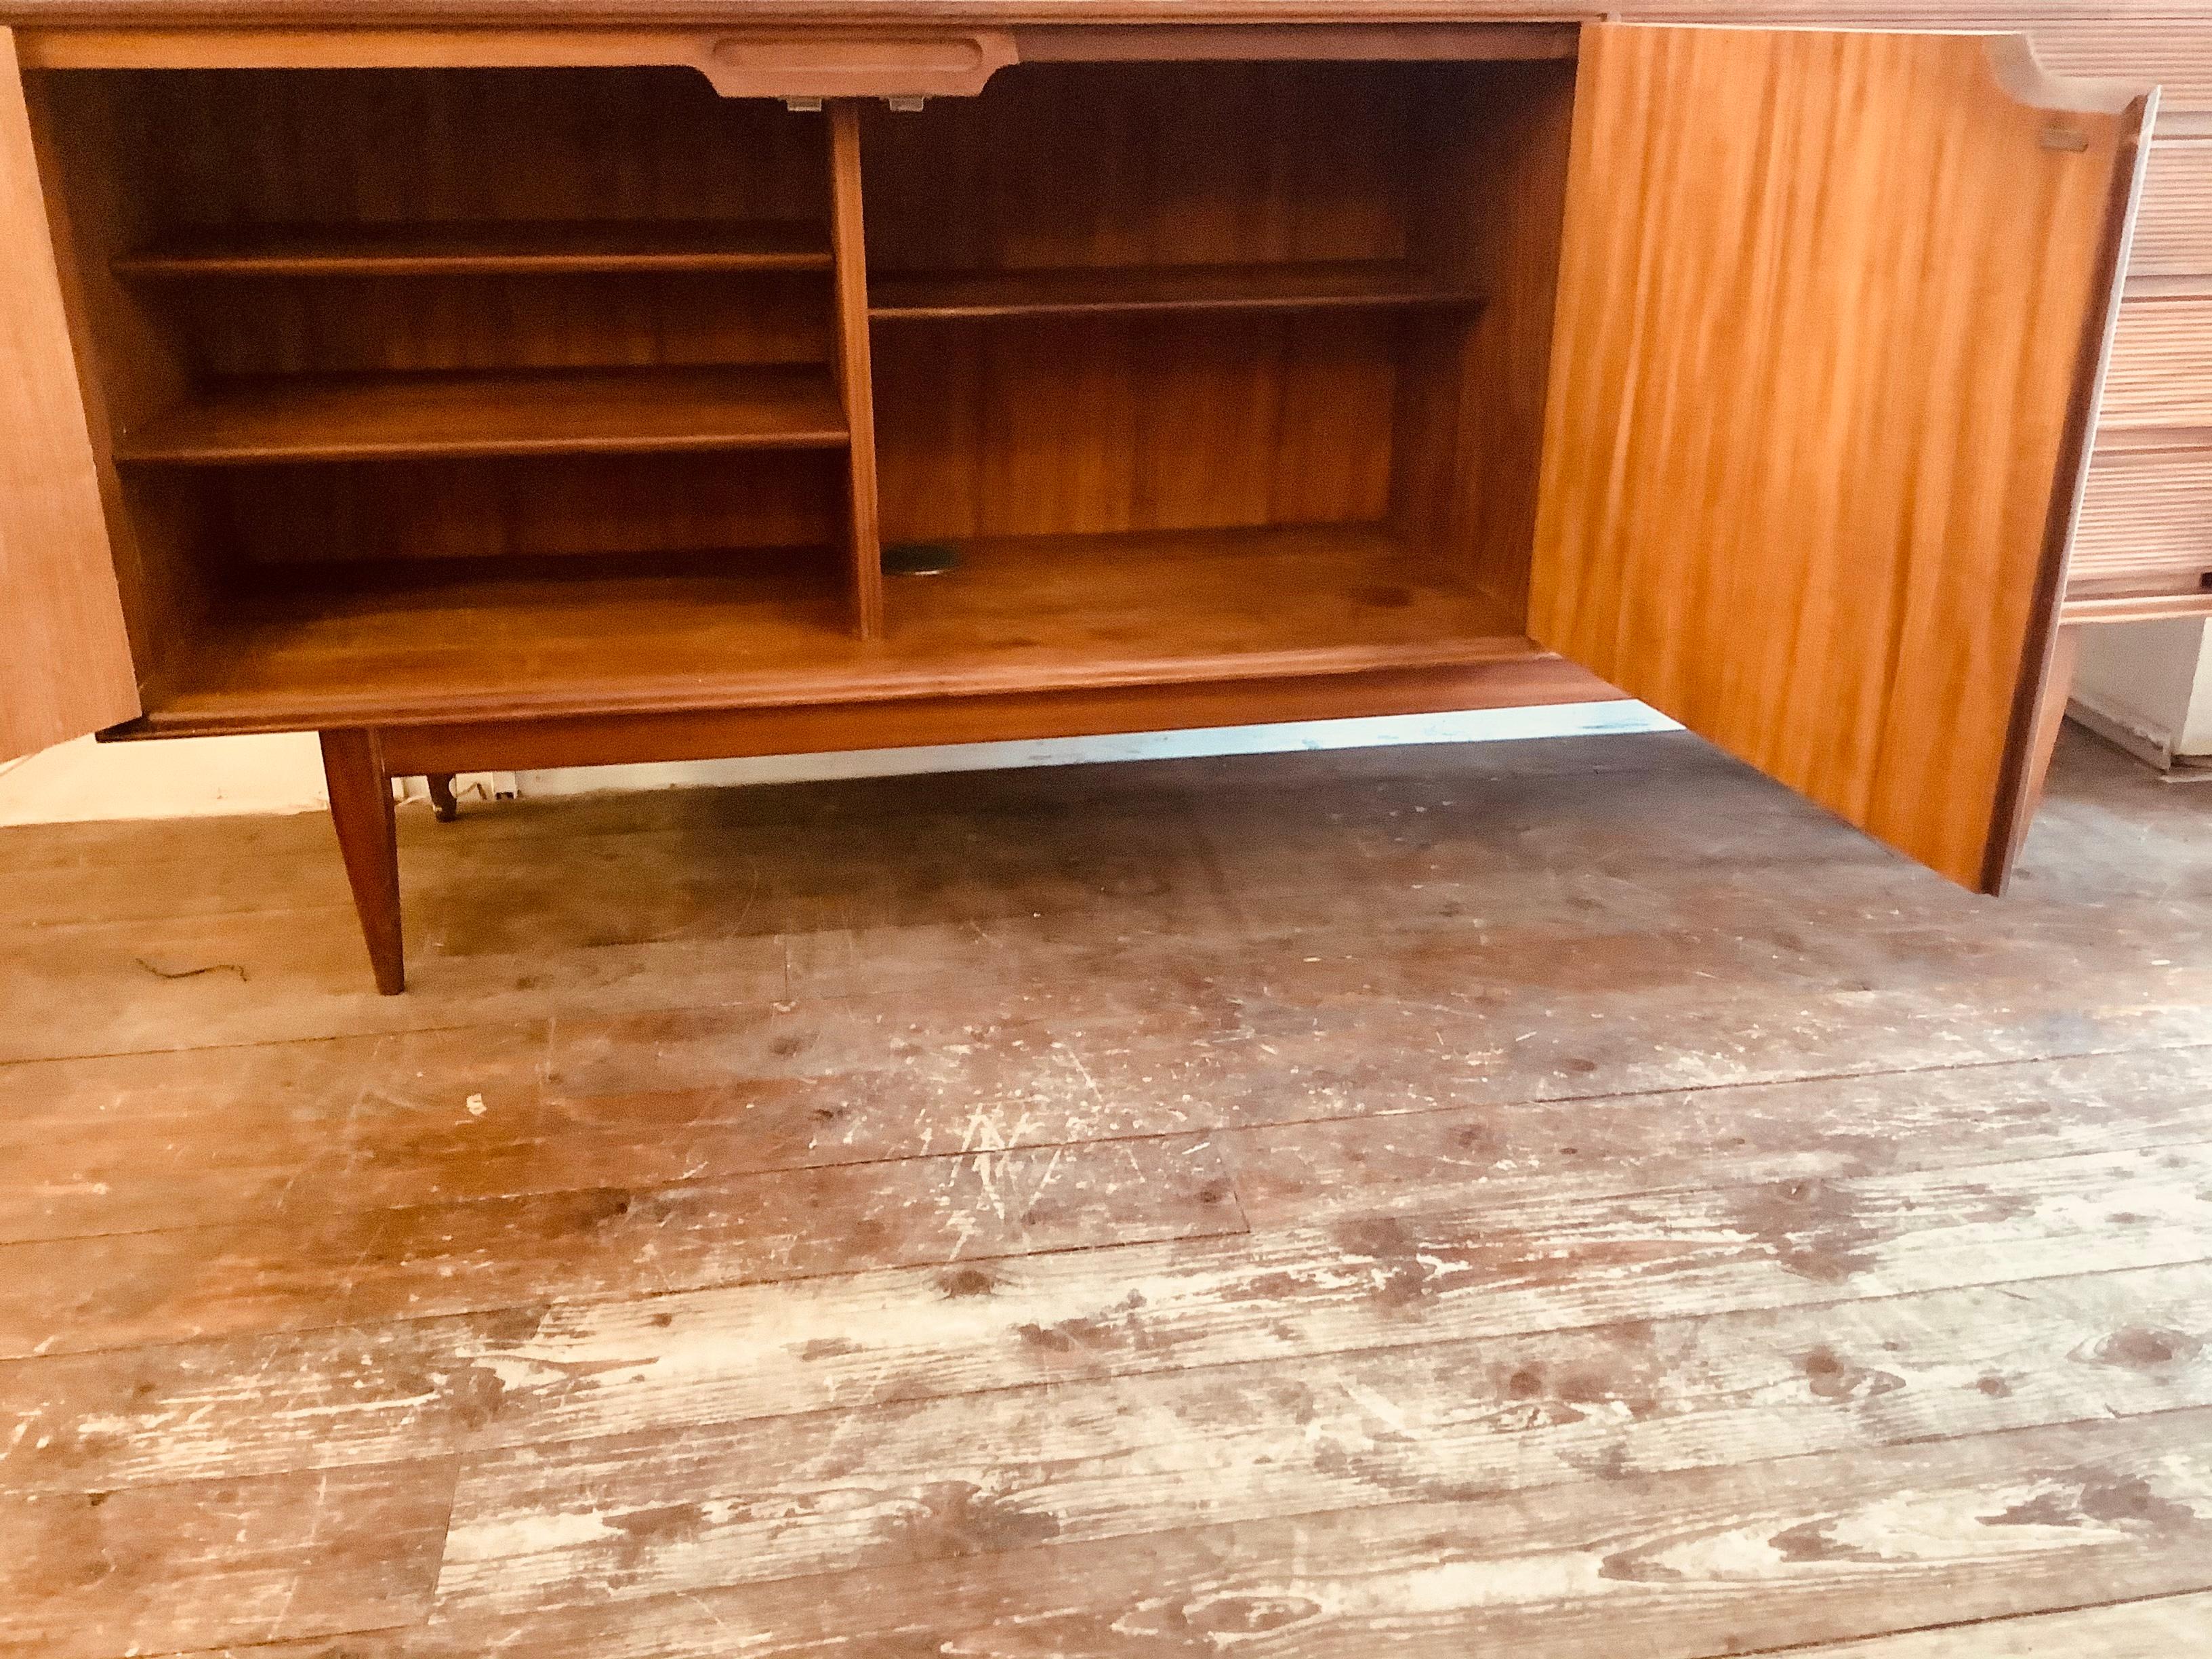 1960’s teak and Afrormosia sideboard designed by Richard Hornby for Heal’s. An impressive sideboard with stunning Afrormosia teak grain and pattern and mid-century styling including the ridged drawer fronts with dovetail joints, internal shelving